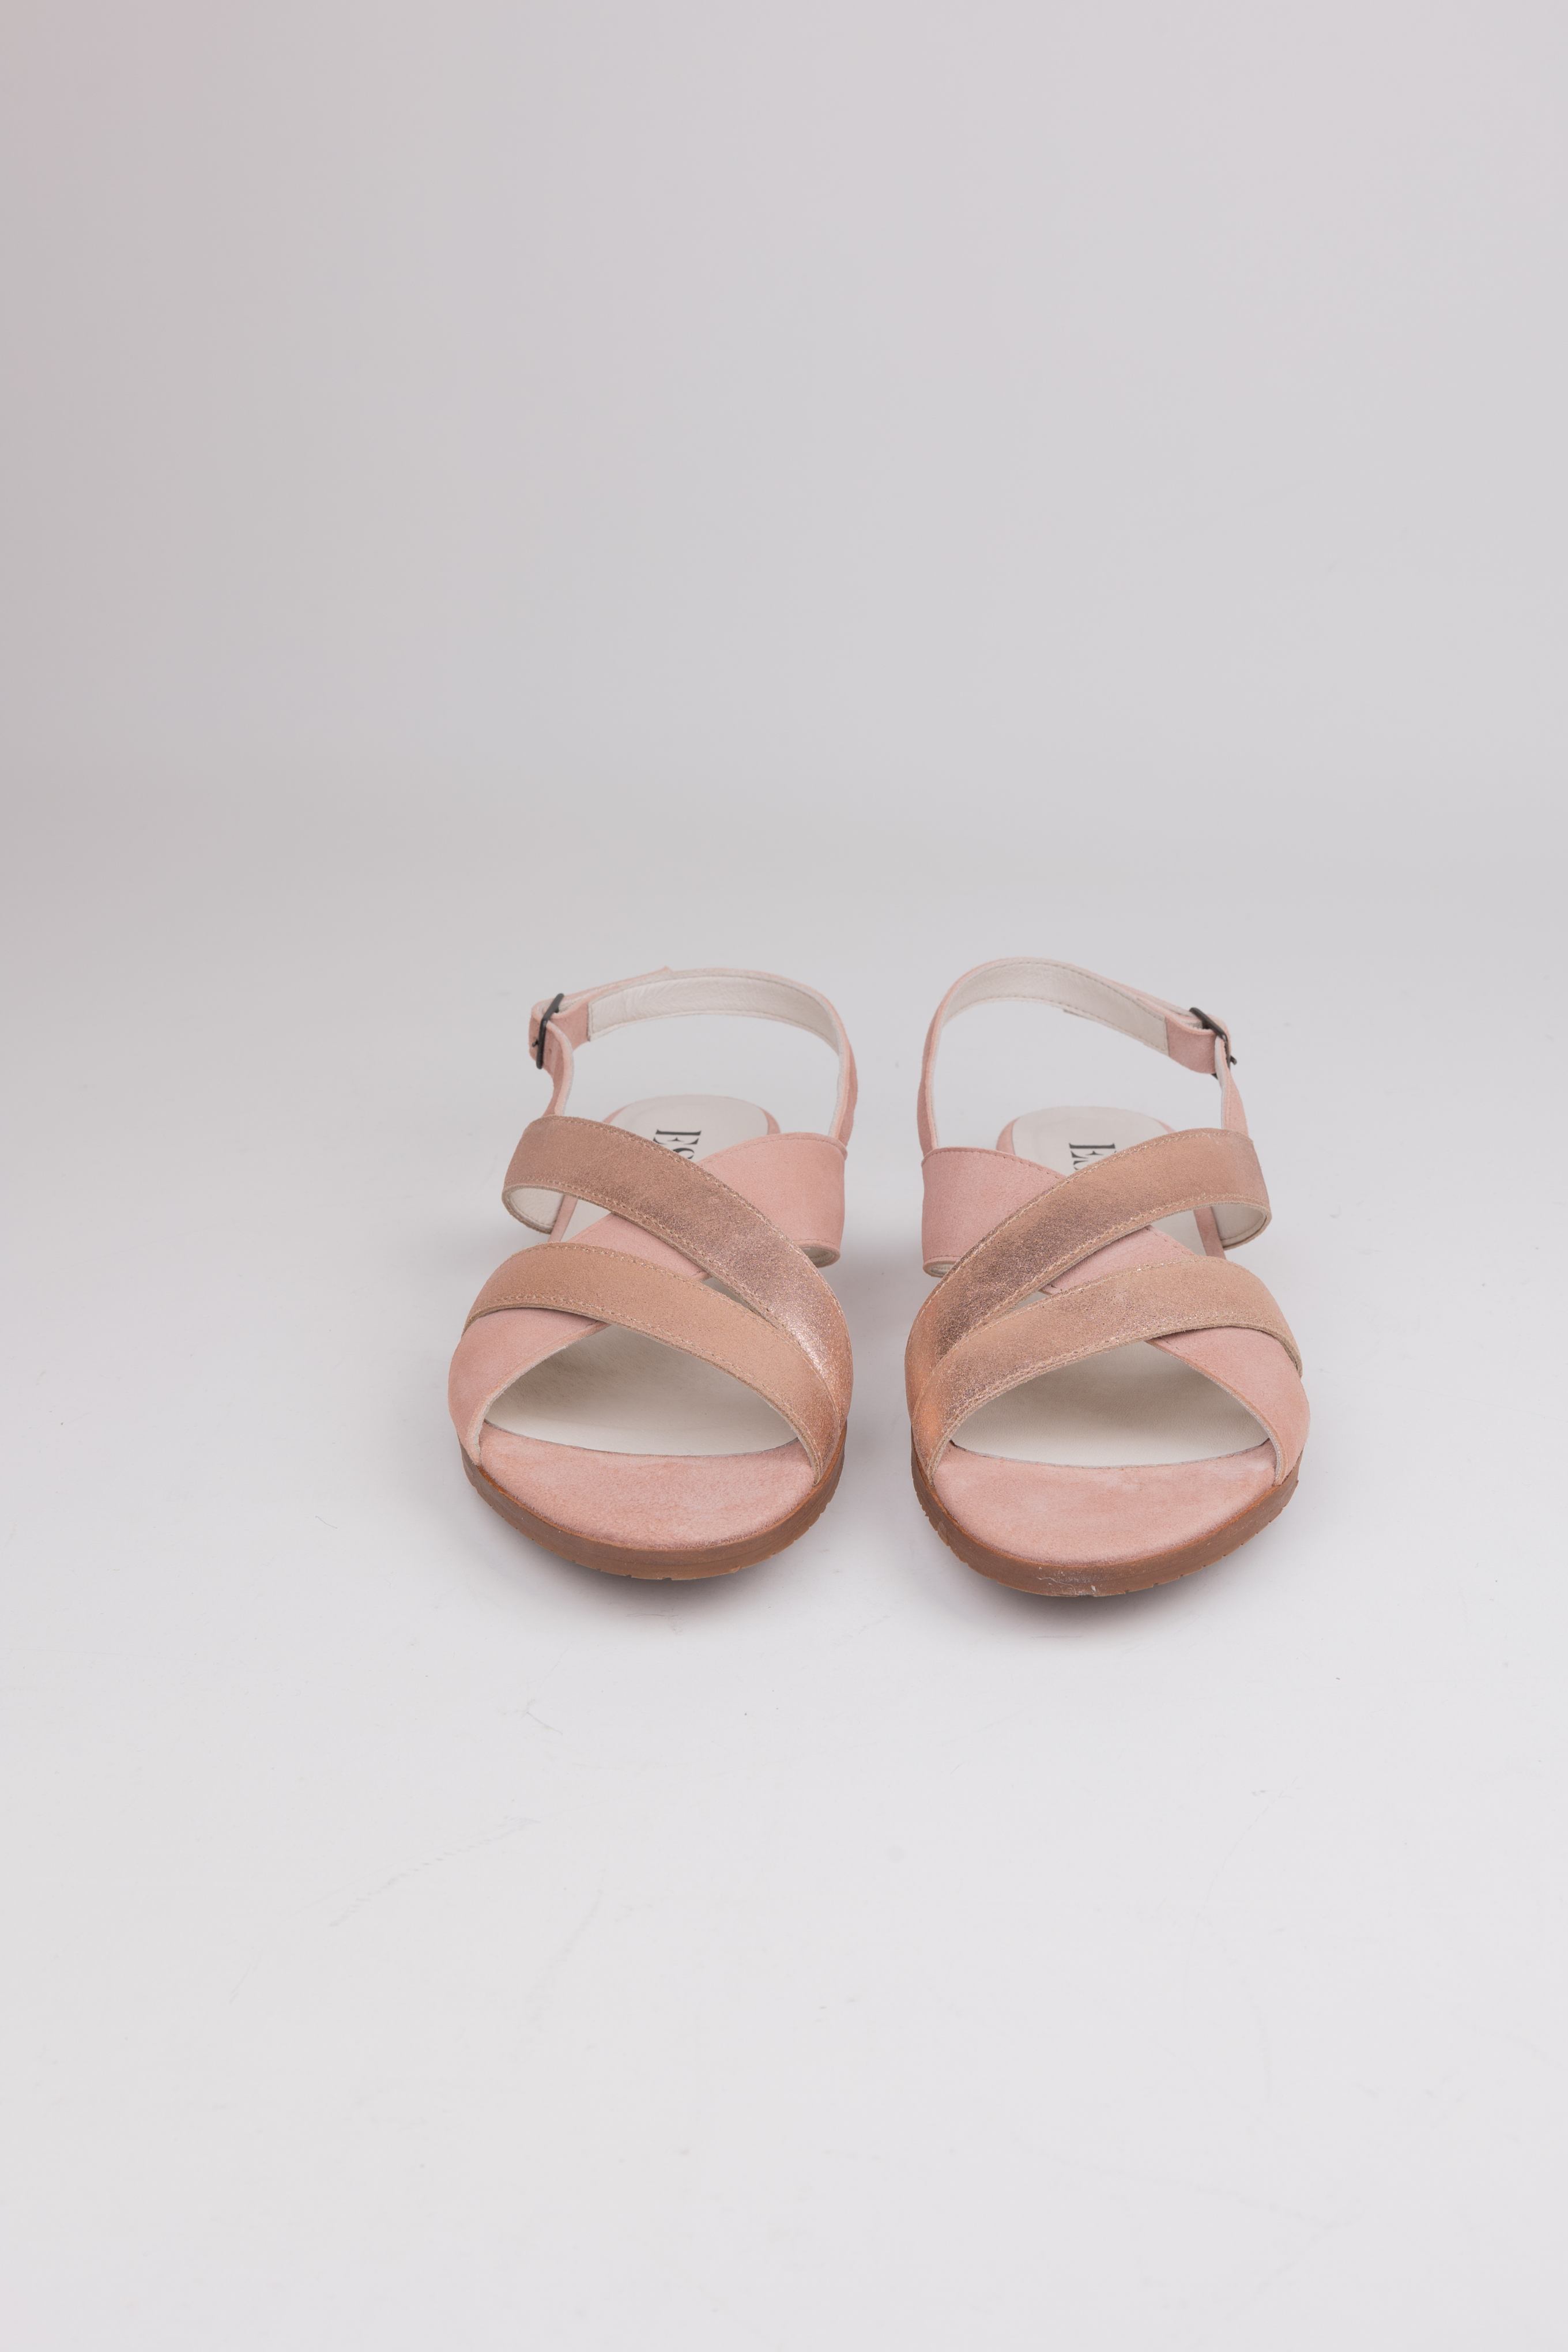 OU - LOOP SANDALS - ROSE GOLD / DUSTY PINK